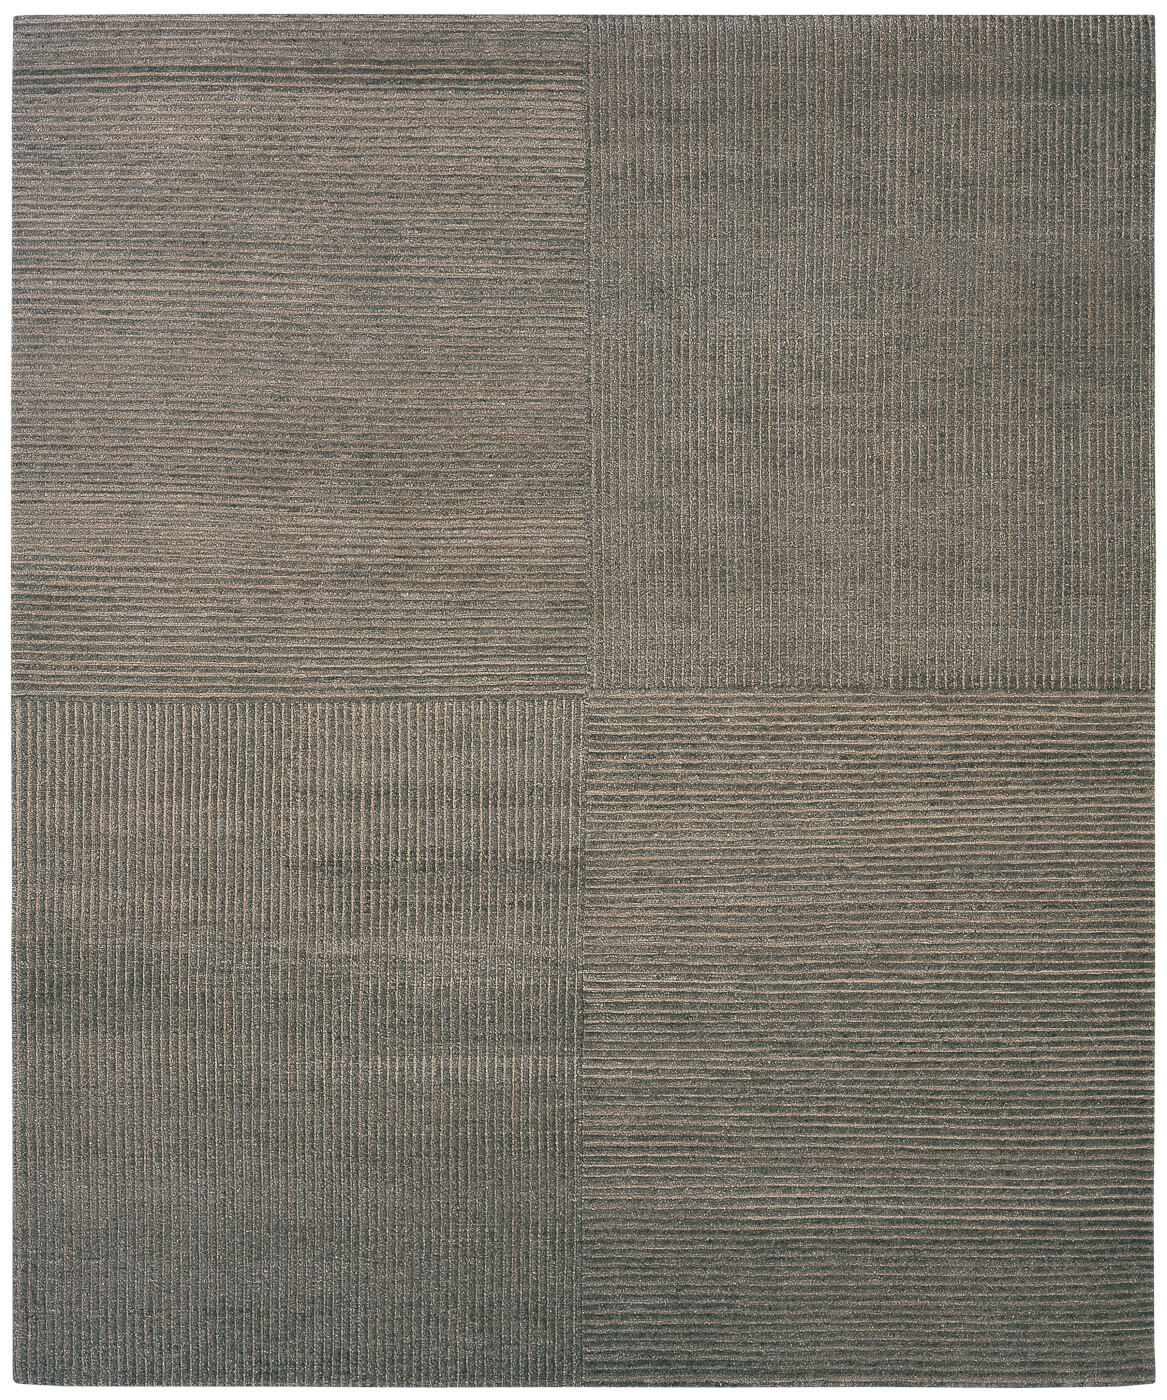 Hand-Knotted Brown Rug